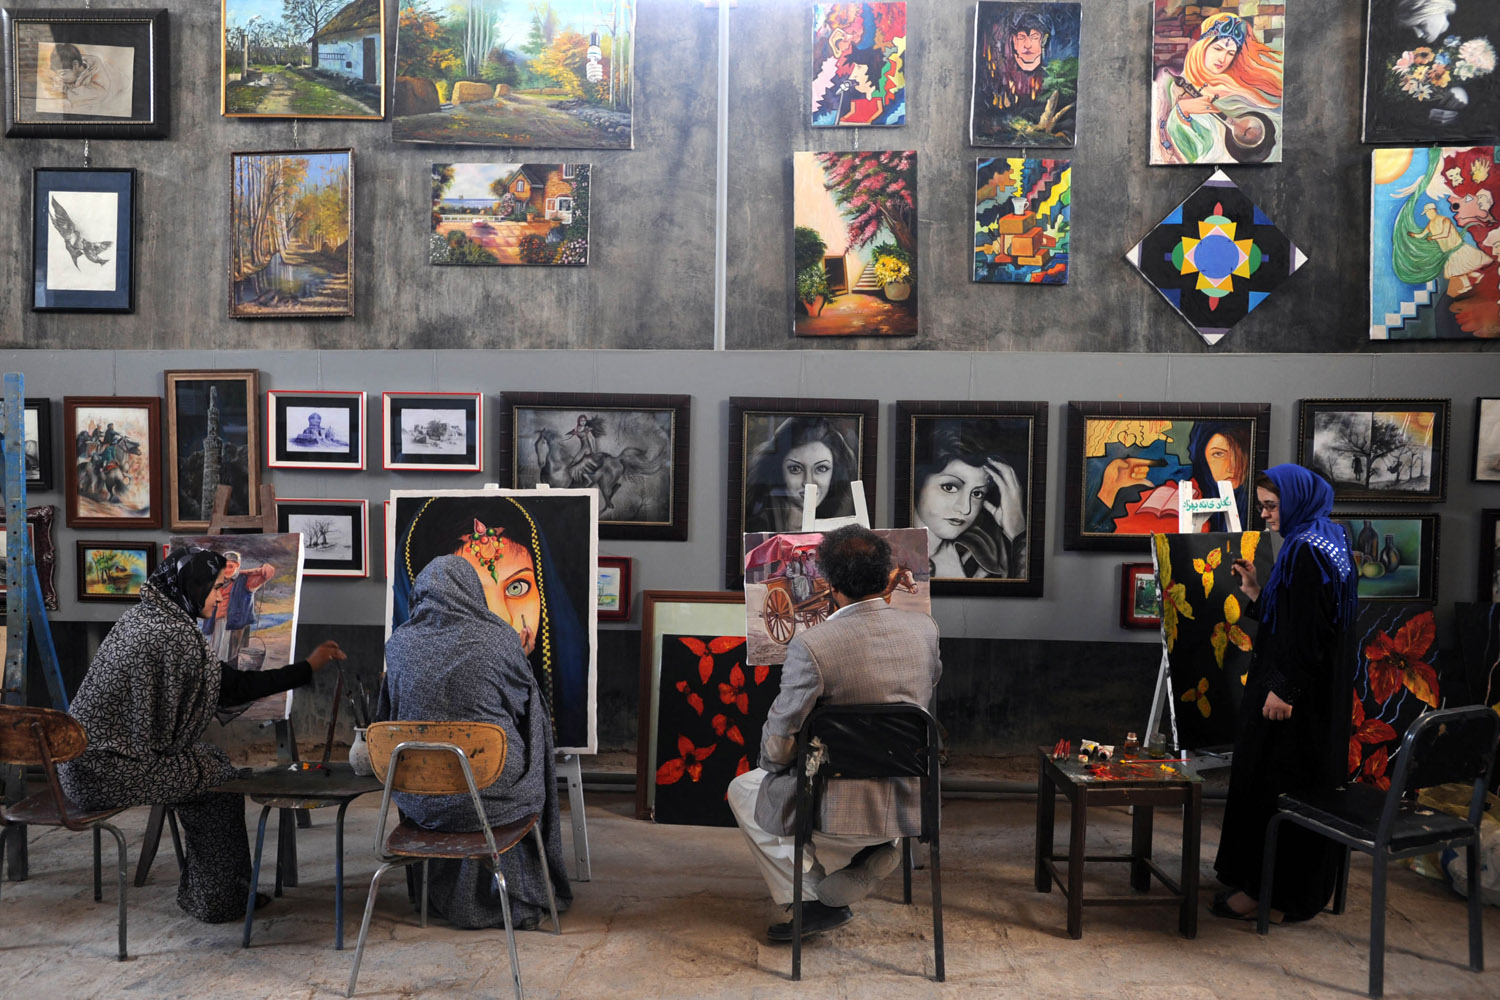 June 11, 2012. Afghan youths learn how to paint at the Behzad Art Gallery in Herat. The Taliban, ousted from power in a US-led invasion in 2001, banned girls from going to school and forbade people from painting and learn the arts.